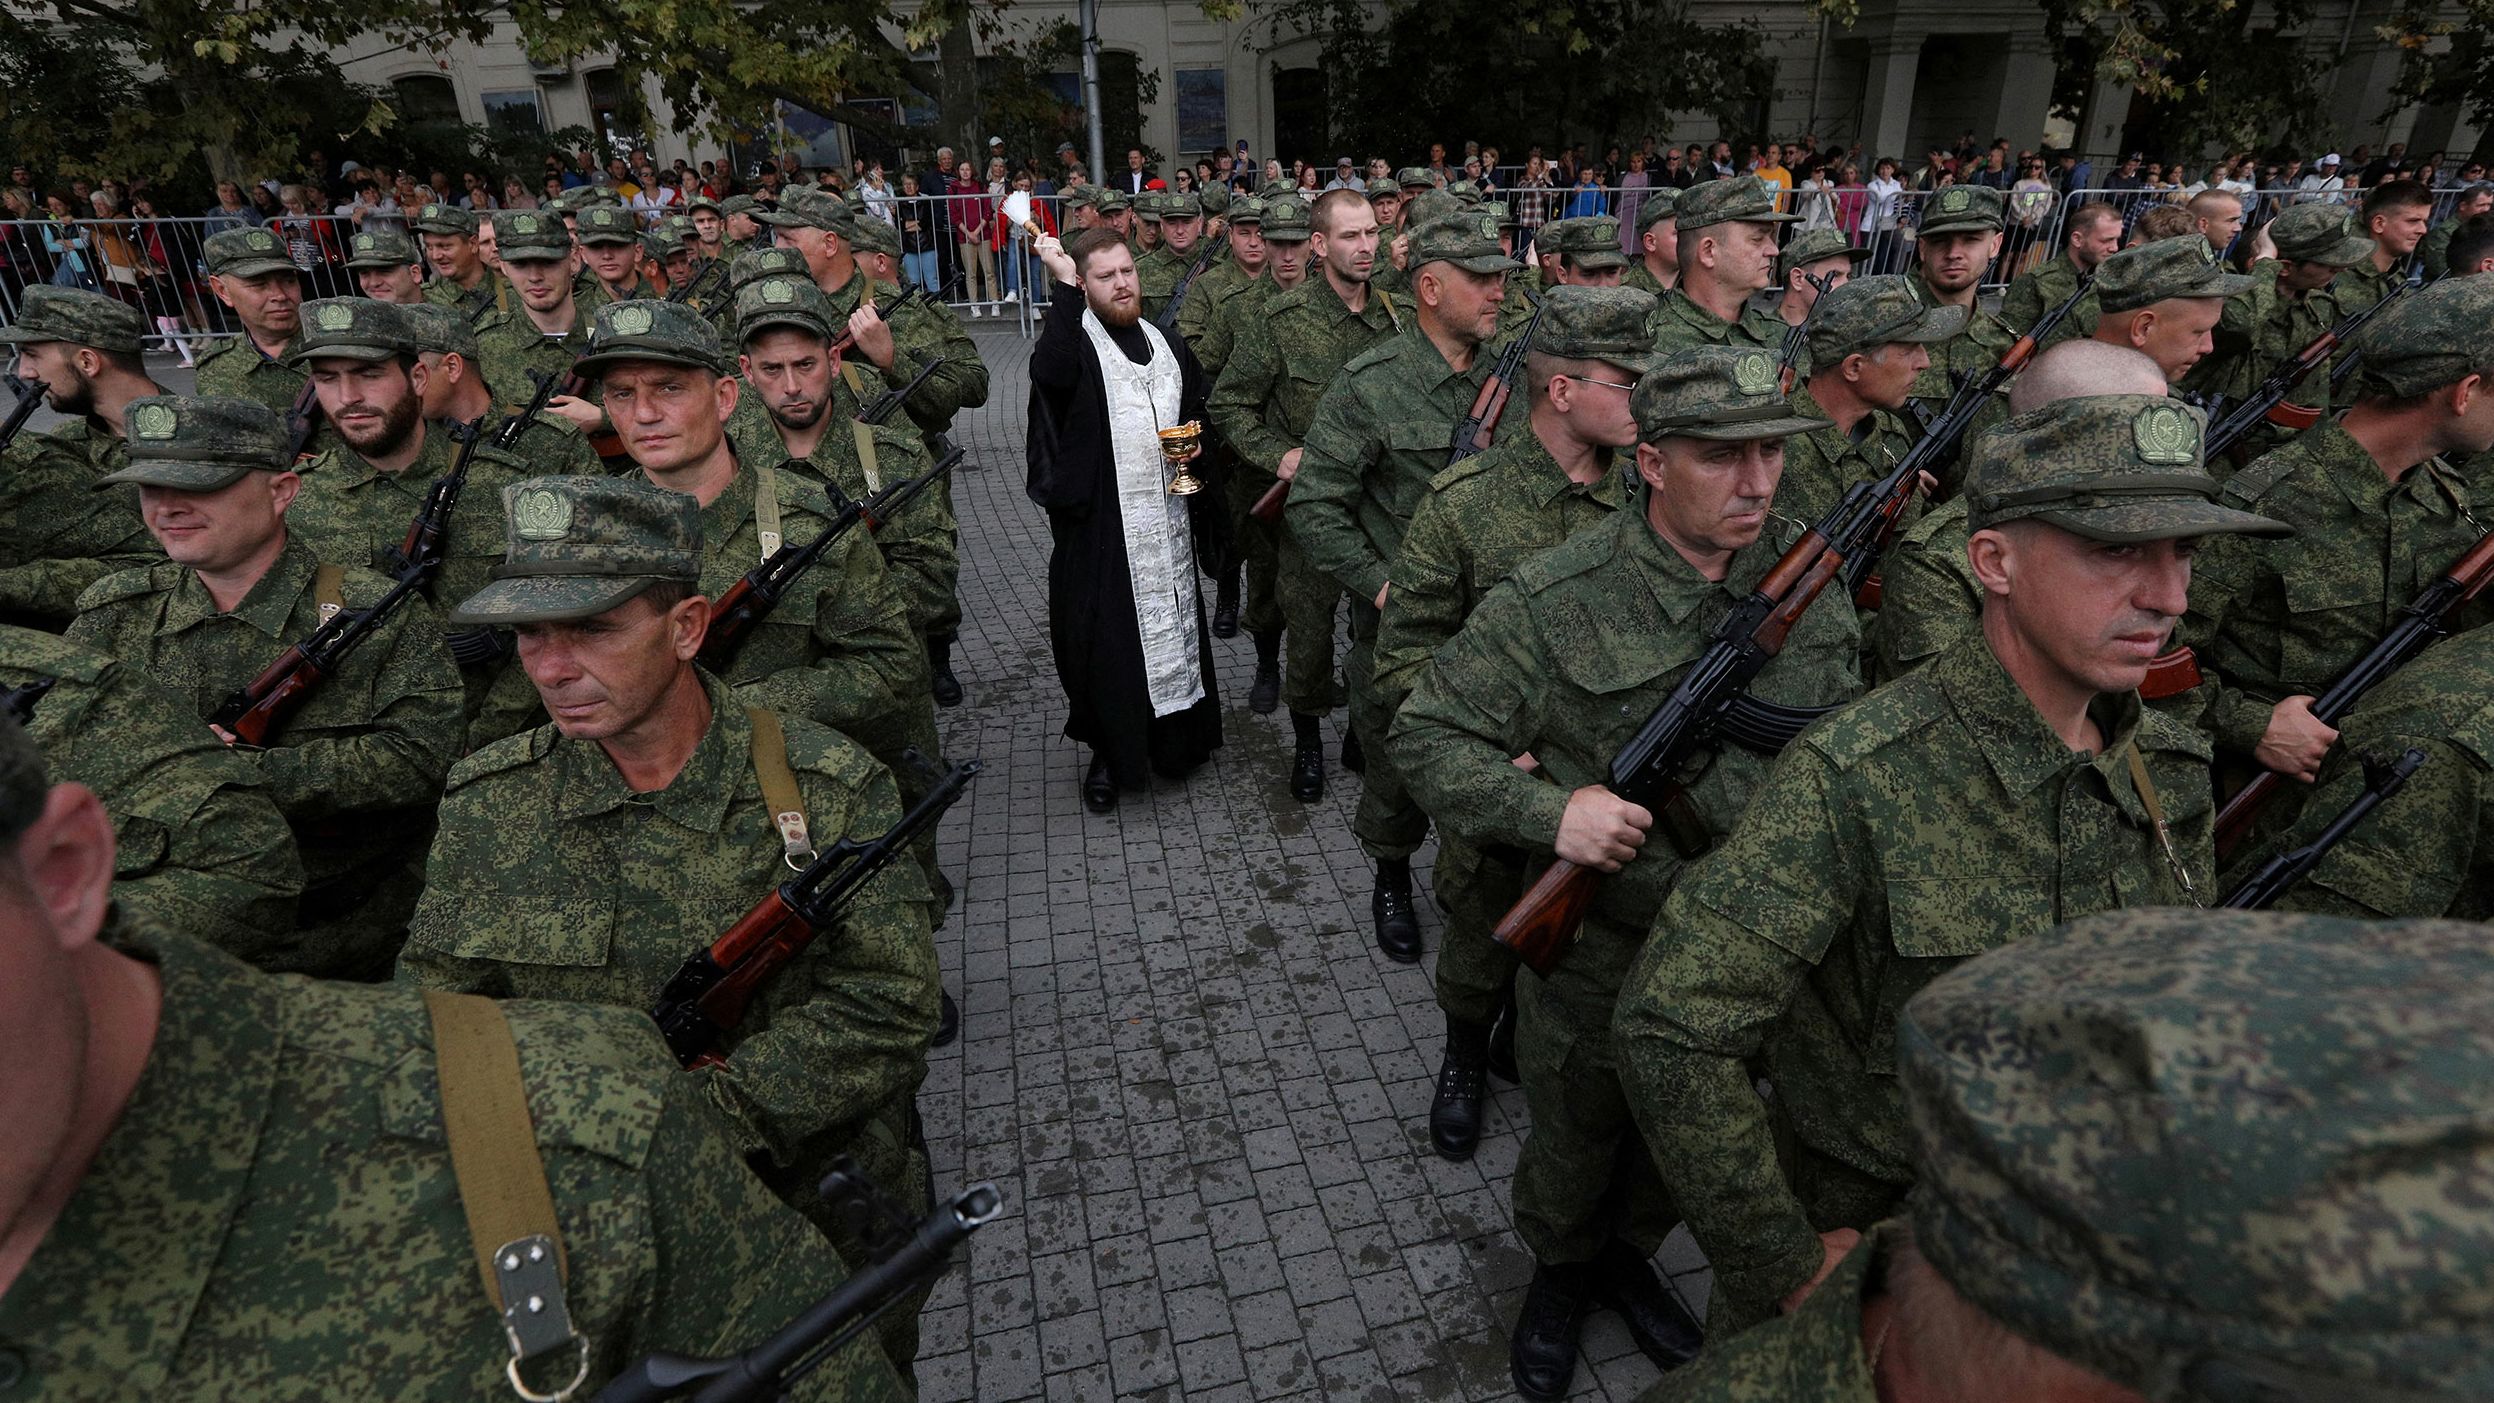 An Orthodox priest in Sevastopol, Crimea, conducts a service for reservists drafted by Russia on Tuesday, September 27. Russian President Vladimir Putin announced the <a href="https://www.cnn.com/2022/09/21/europe/ukraine-russian-referendums-intl-hnk/index.html" target="_blank">"partial mobilization"</a> of Russian citizens last week, a move that threatens to escalate his faltering invasion of Ukraine. So far, the mobilization <a href="https://www.cnn.com/2022/09/25/europe/russian-mobilization-putin-exodus-chaos-new-laws-intl-hnk" target="_blank">is off to a chaotic start</a> amid protests, drafting mistakes and people fleeing Russia.